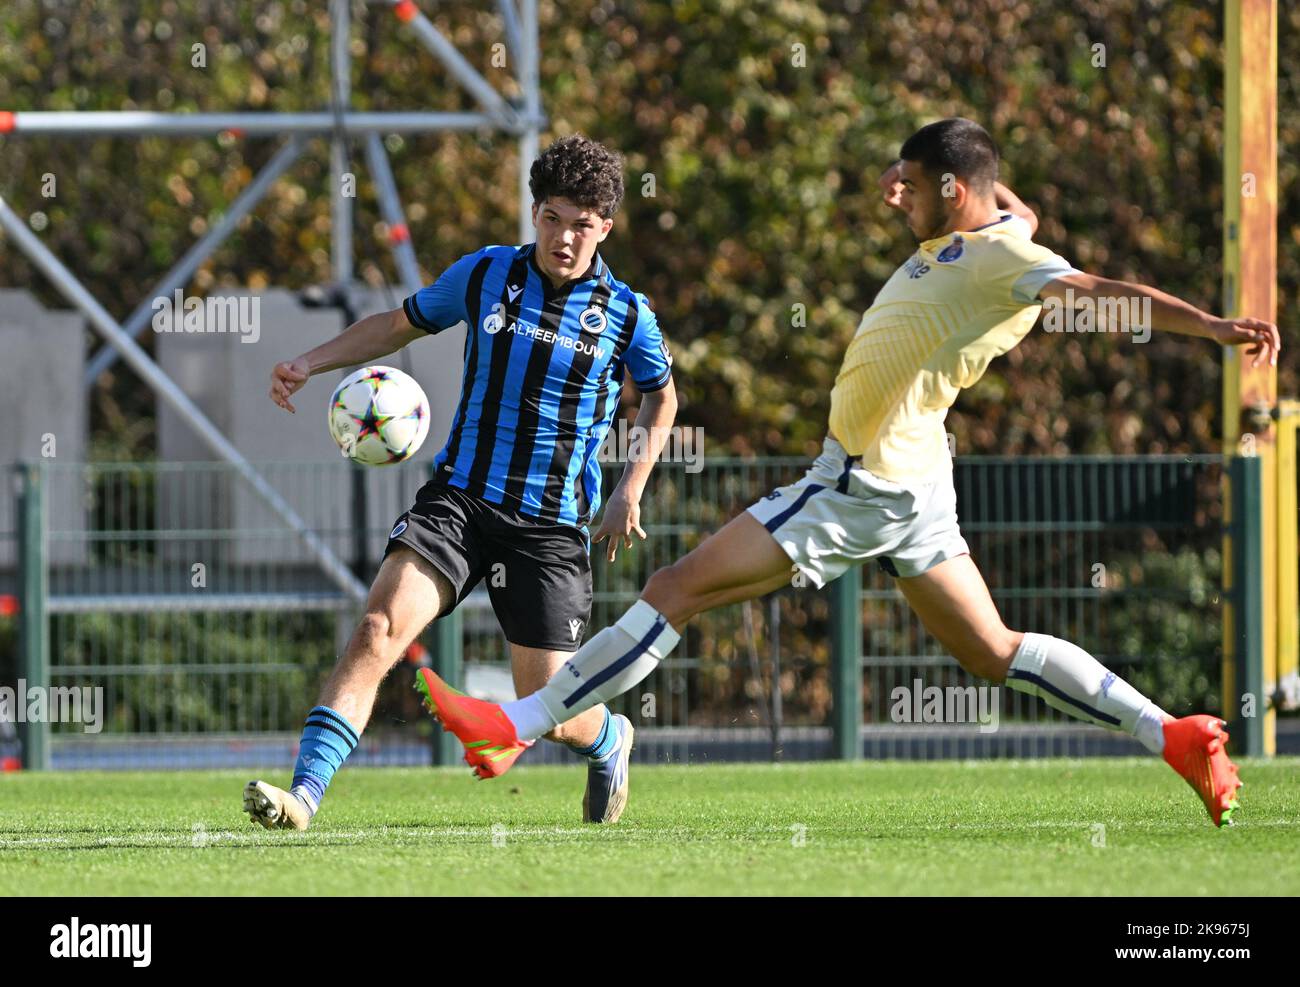 Kyriani Sabbe (2) of Club NXT pictured with Gabriel Bras (4) of FC Porto  during a soccer game between the youth teams of Club Brugge KV and FC Porto  during the fifth